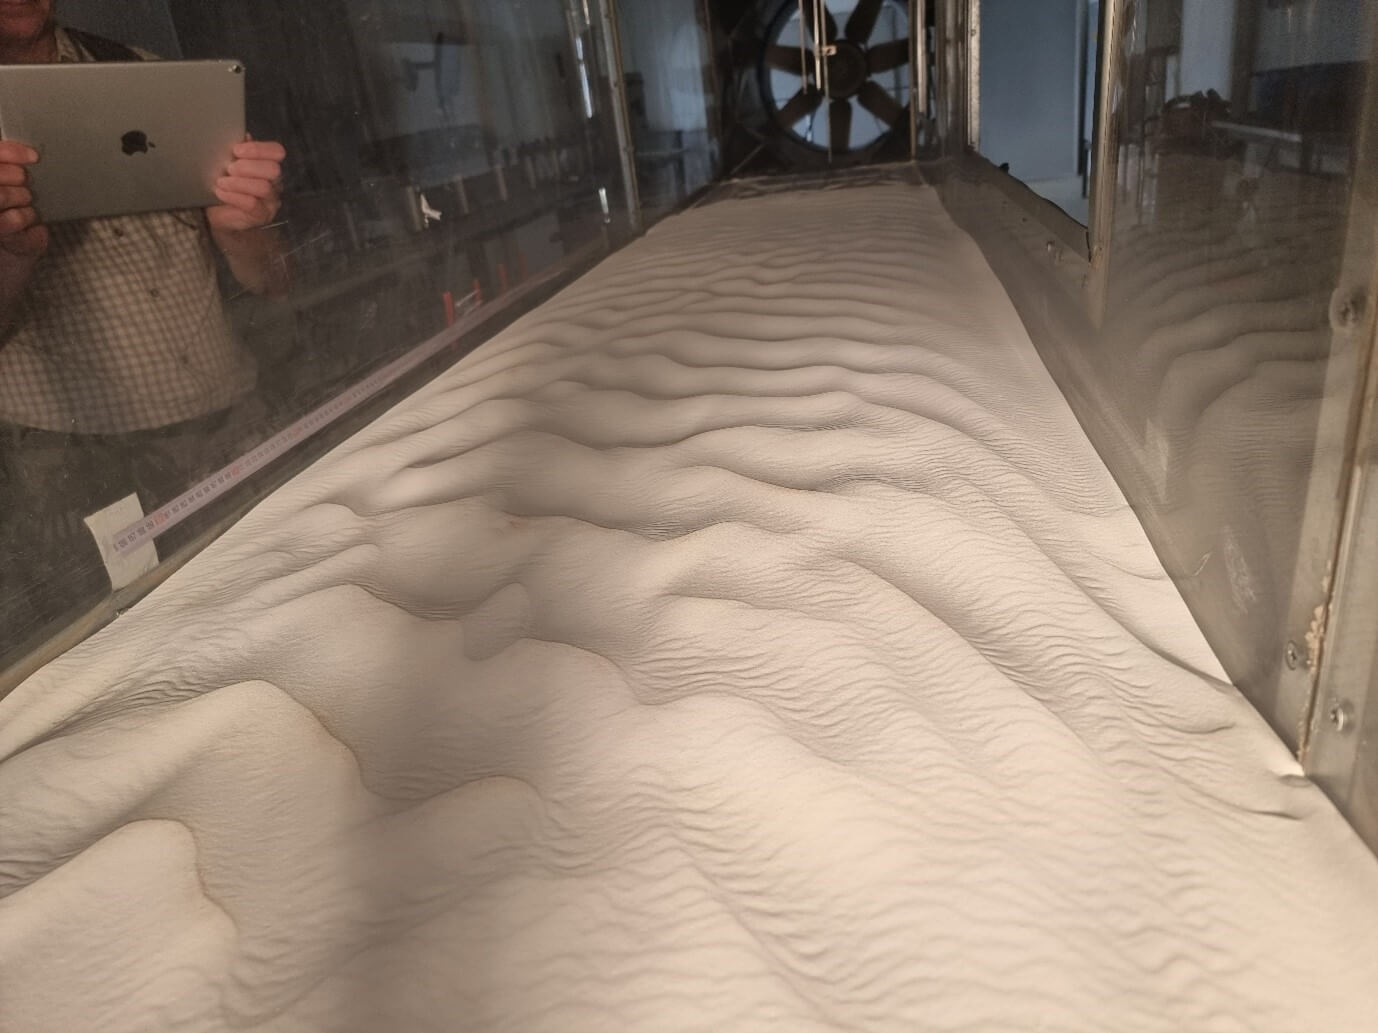 A picture of the gallons inside the wind tunnel in the Aeolian Simulation Laboratory at Ben Gurion University. The sand consists of glass balls with a size of 90 microns. Photo credit: Prof. Hezi Yitzhak